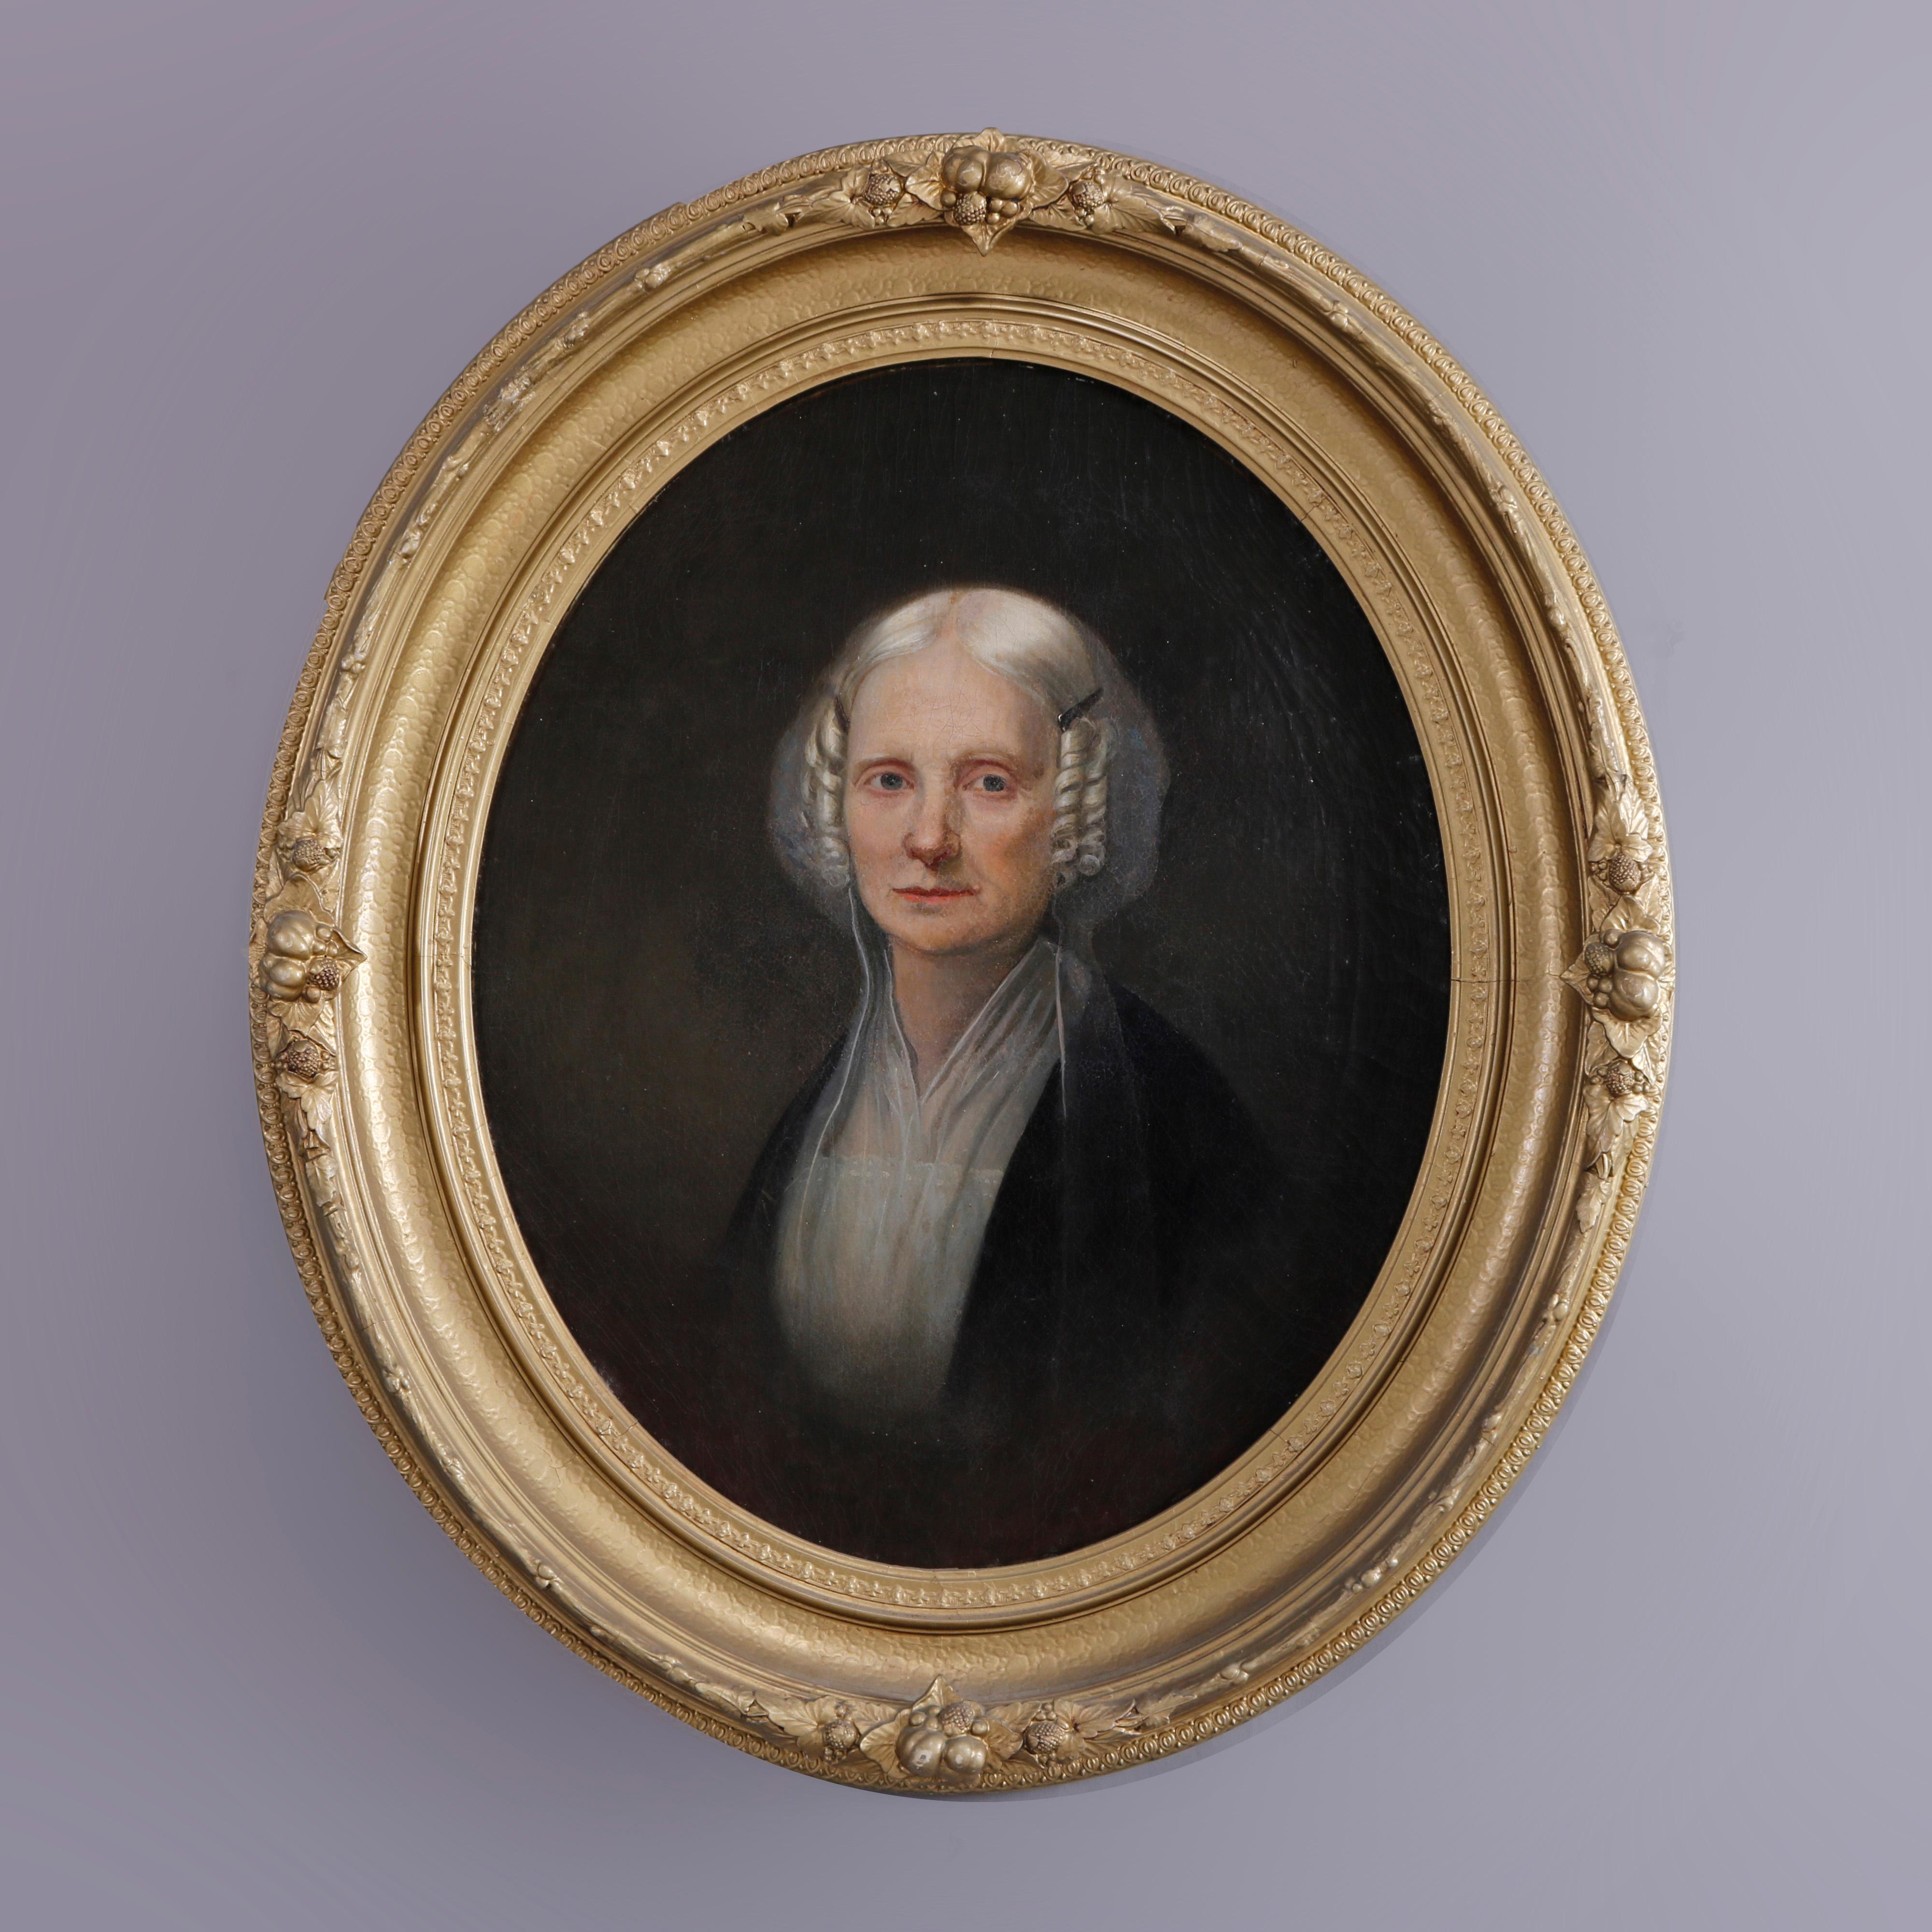 An antique painting offers oil on canvas portrait of a woman, seated in an oval giltwood frame, c1880

Measures - 35.25'' H x 30.25'' W x 4'' D; sight 22'' x 27''.